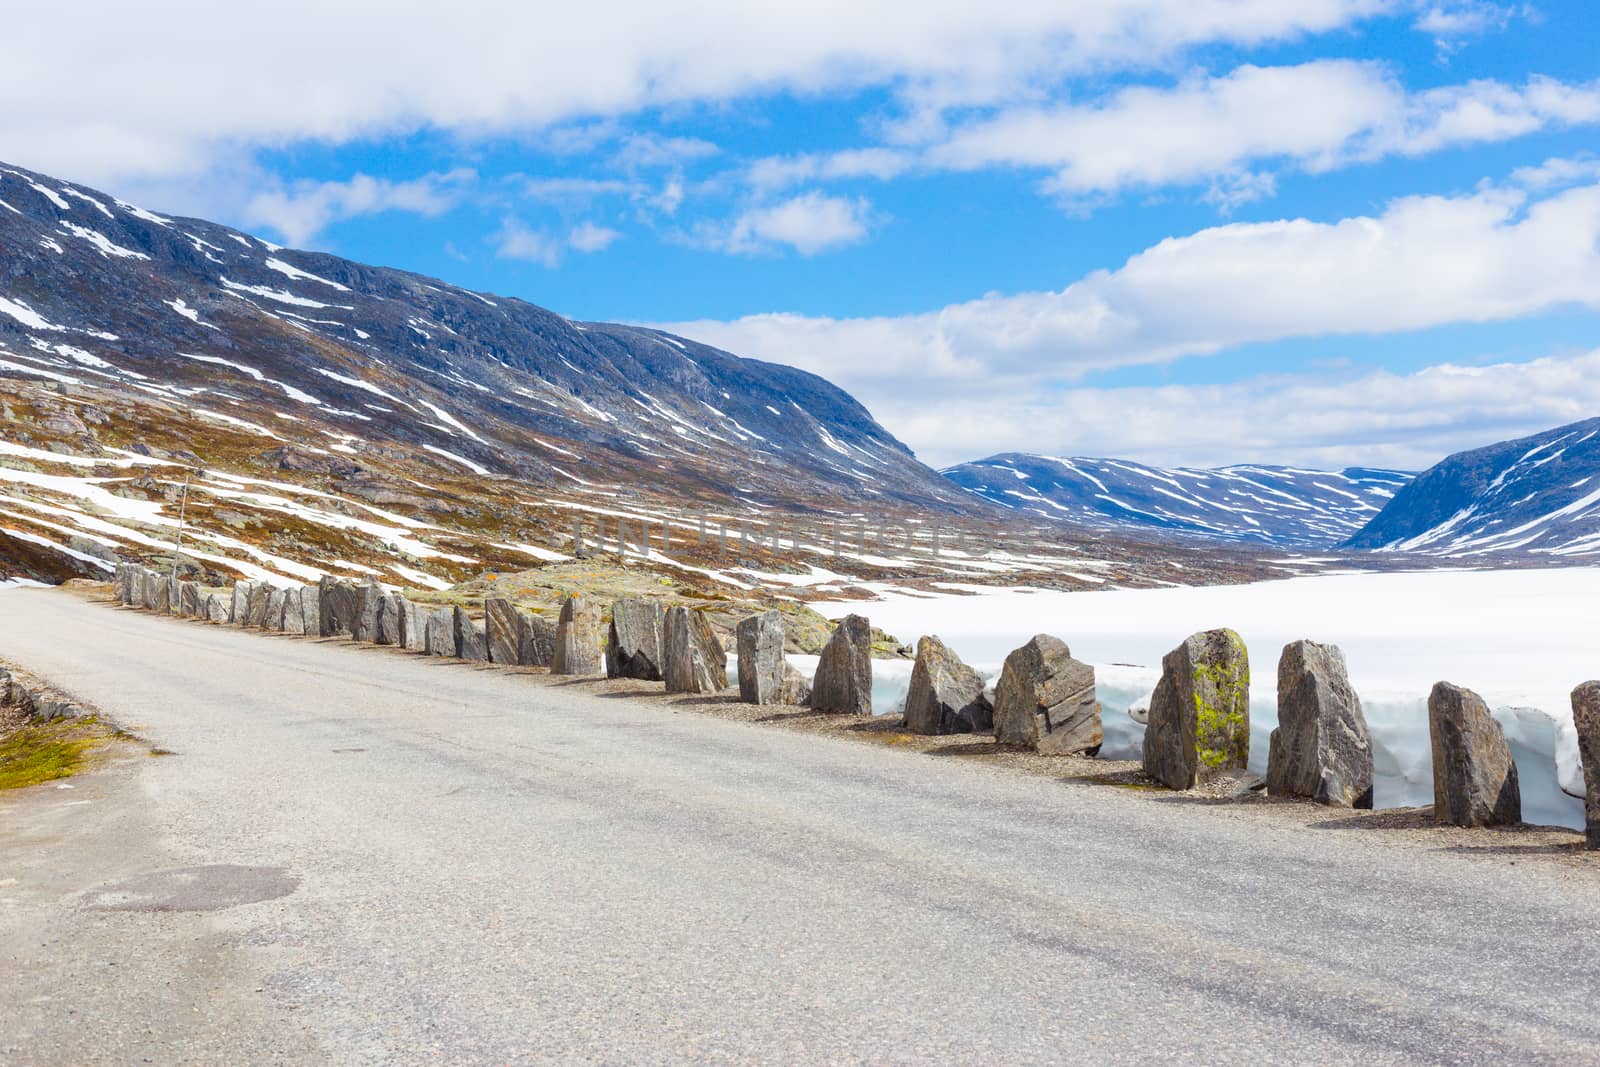 Old road with stones in summer with snow in Norway mountains